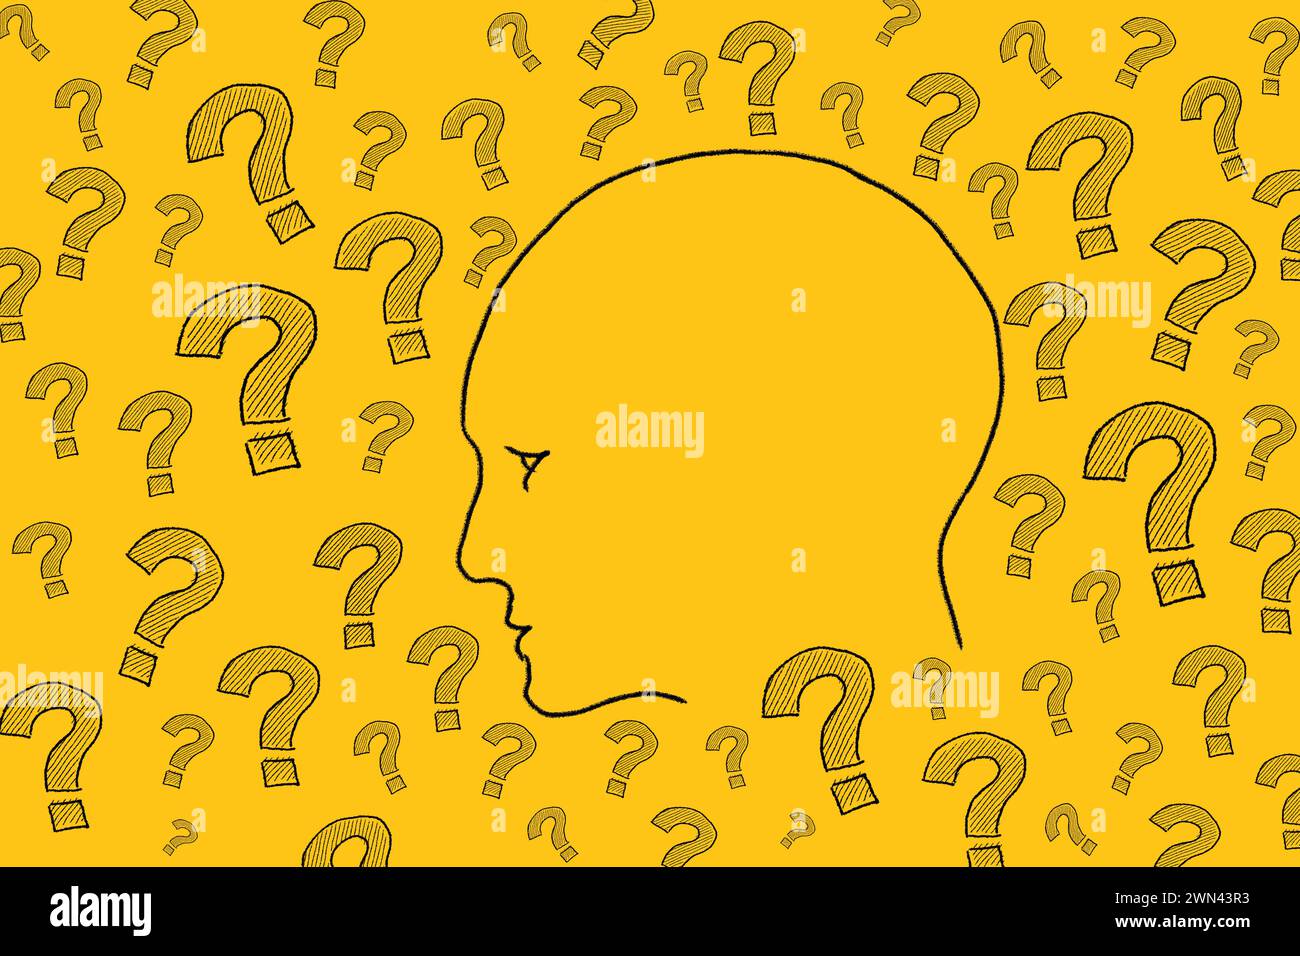 Human head with question marks. Illustration on yellow background Stock Photo